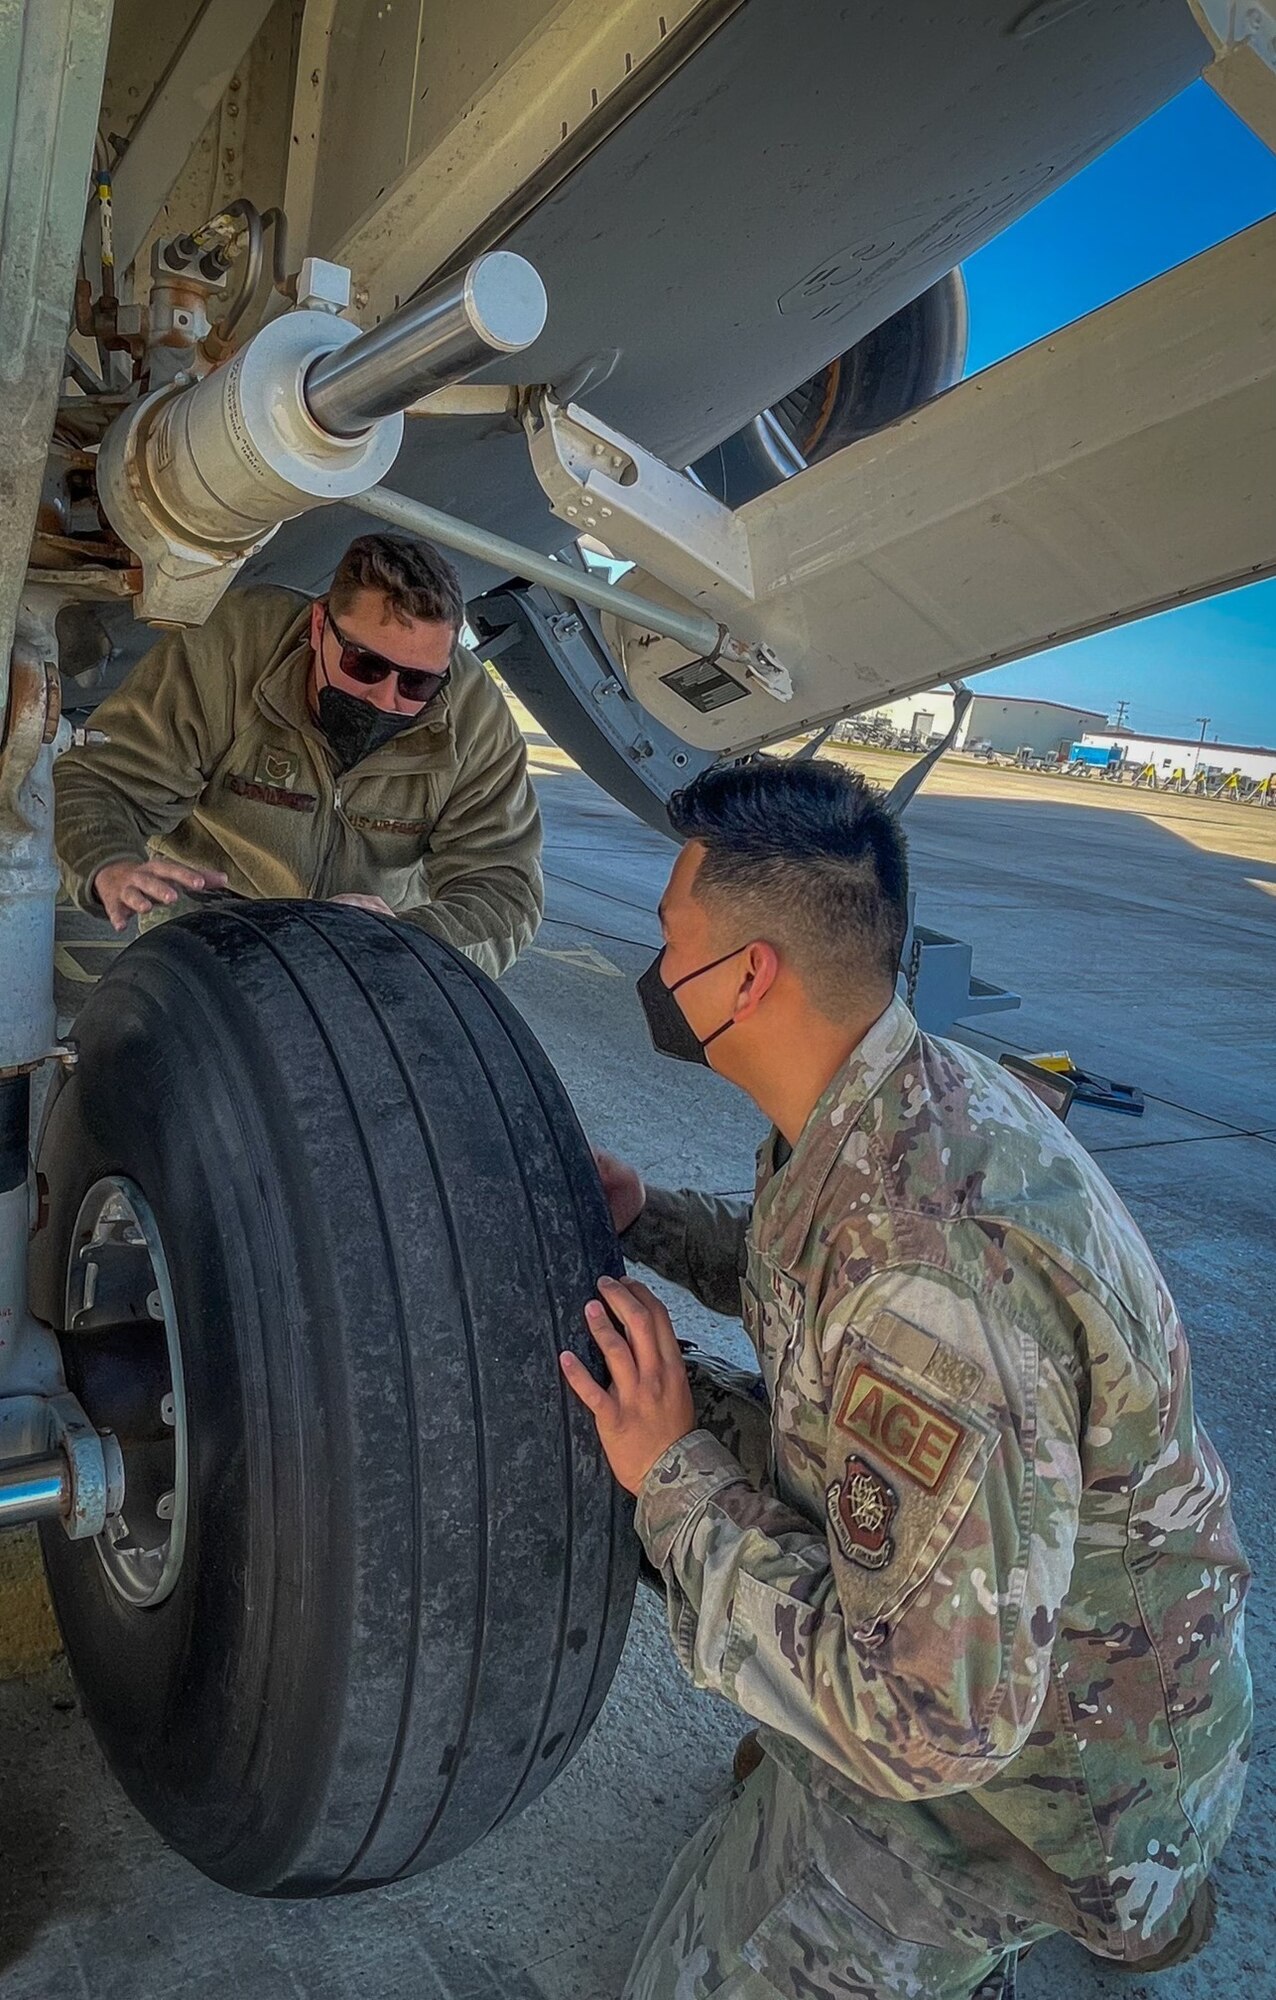 Tech. Sgt. Ozzie Slawnikowski, left, 725th Air Mobility Squadron (AMS) crew chief non-commissioned officer in charge teaches Staff Sgt. Reynaldo Guevarra, right, 725th AMS aerospace ground equipment craftsman, about tire changes on a C-17 Globemaster III during a multi-capable airman (MCA) exercise at Naval Station Rota, Spain, Feb. 11, 2022. During the weeklong MCA exercise, 725th AMS participated in a familiarization of new tasks using real equipment as well as virtual reality training tools. An MCA is critical to enabling agile combat employment, which is a proactive and reactive operational scheme of maneuver designed to address the challenges of projecting combat power across the globe with a significantly reduced global footprint, increased risk from adversarial technological advances, and fiscal and political constraints. (Courtesy photo)